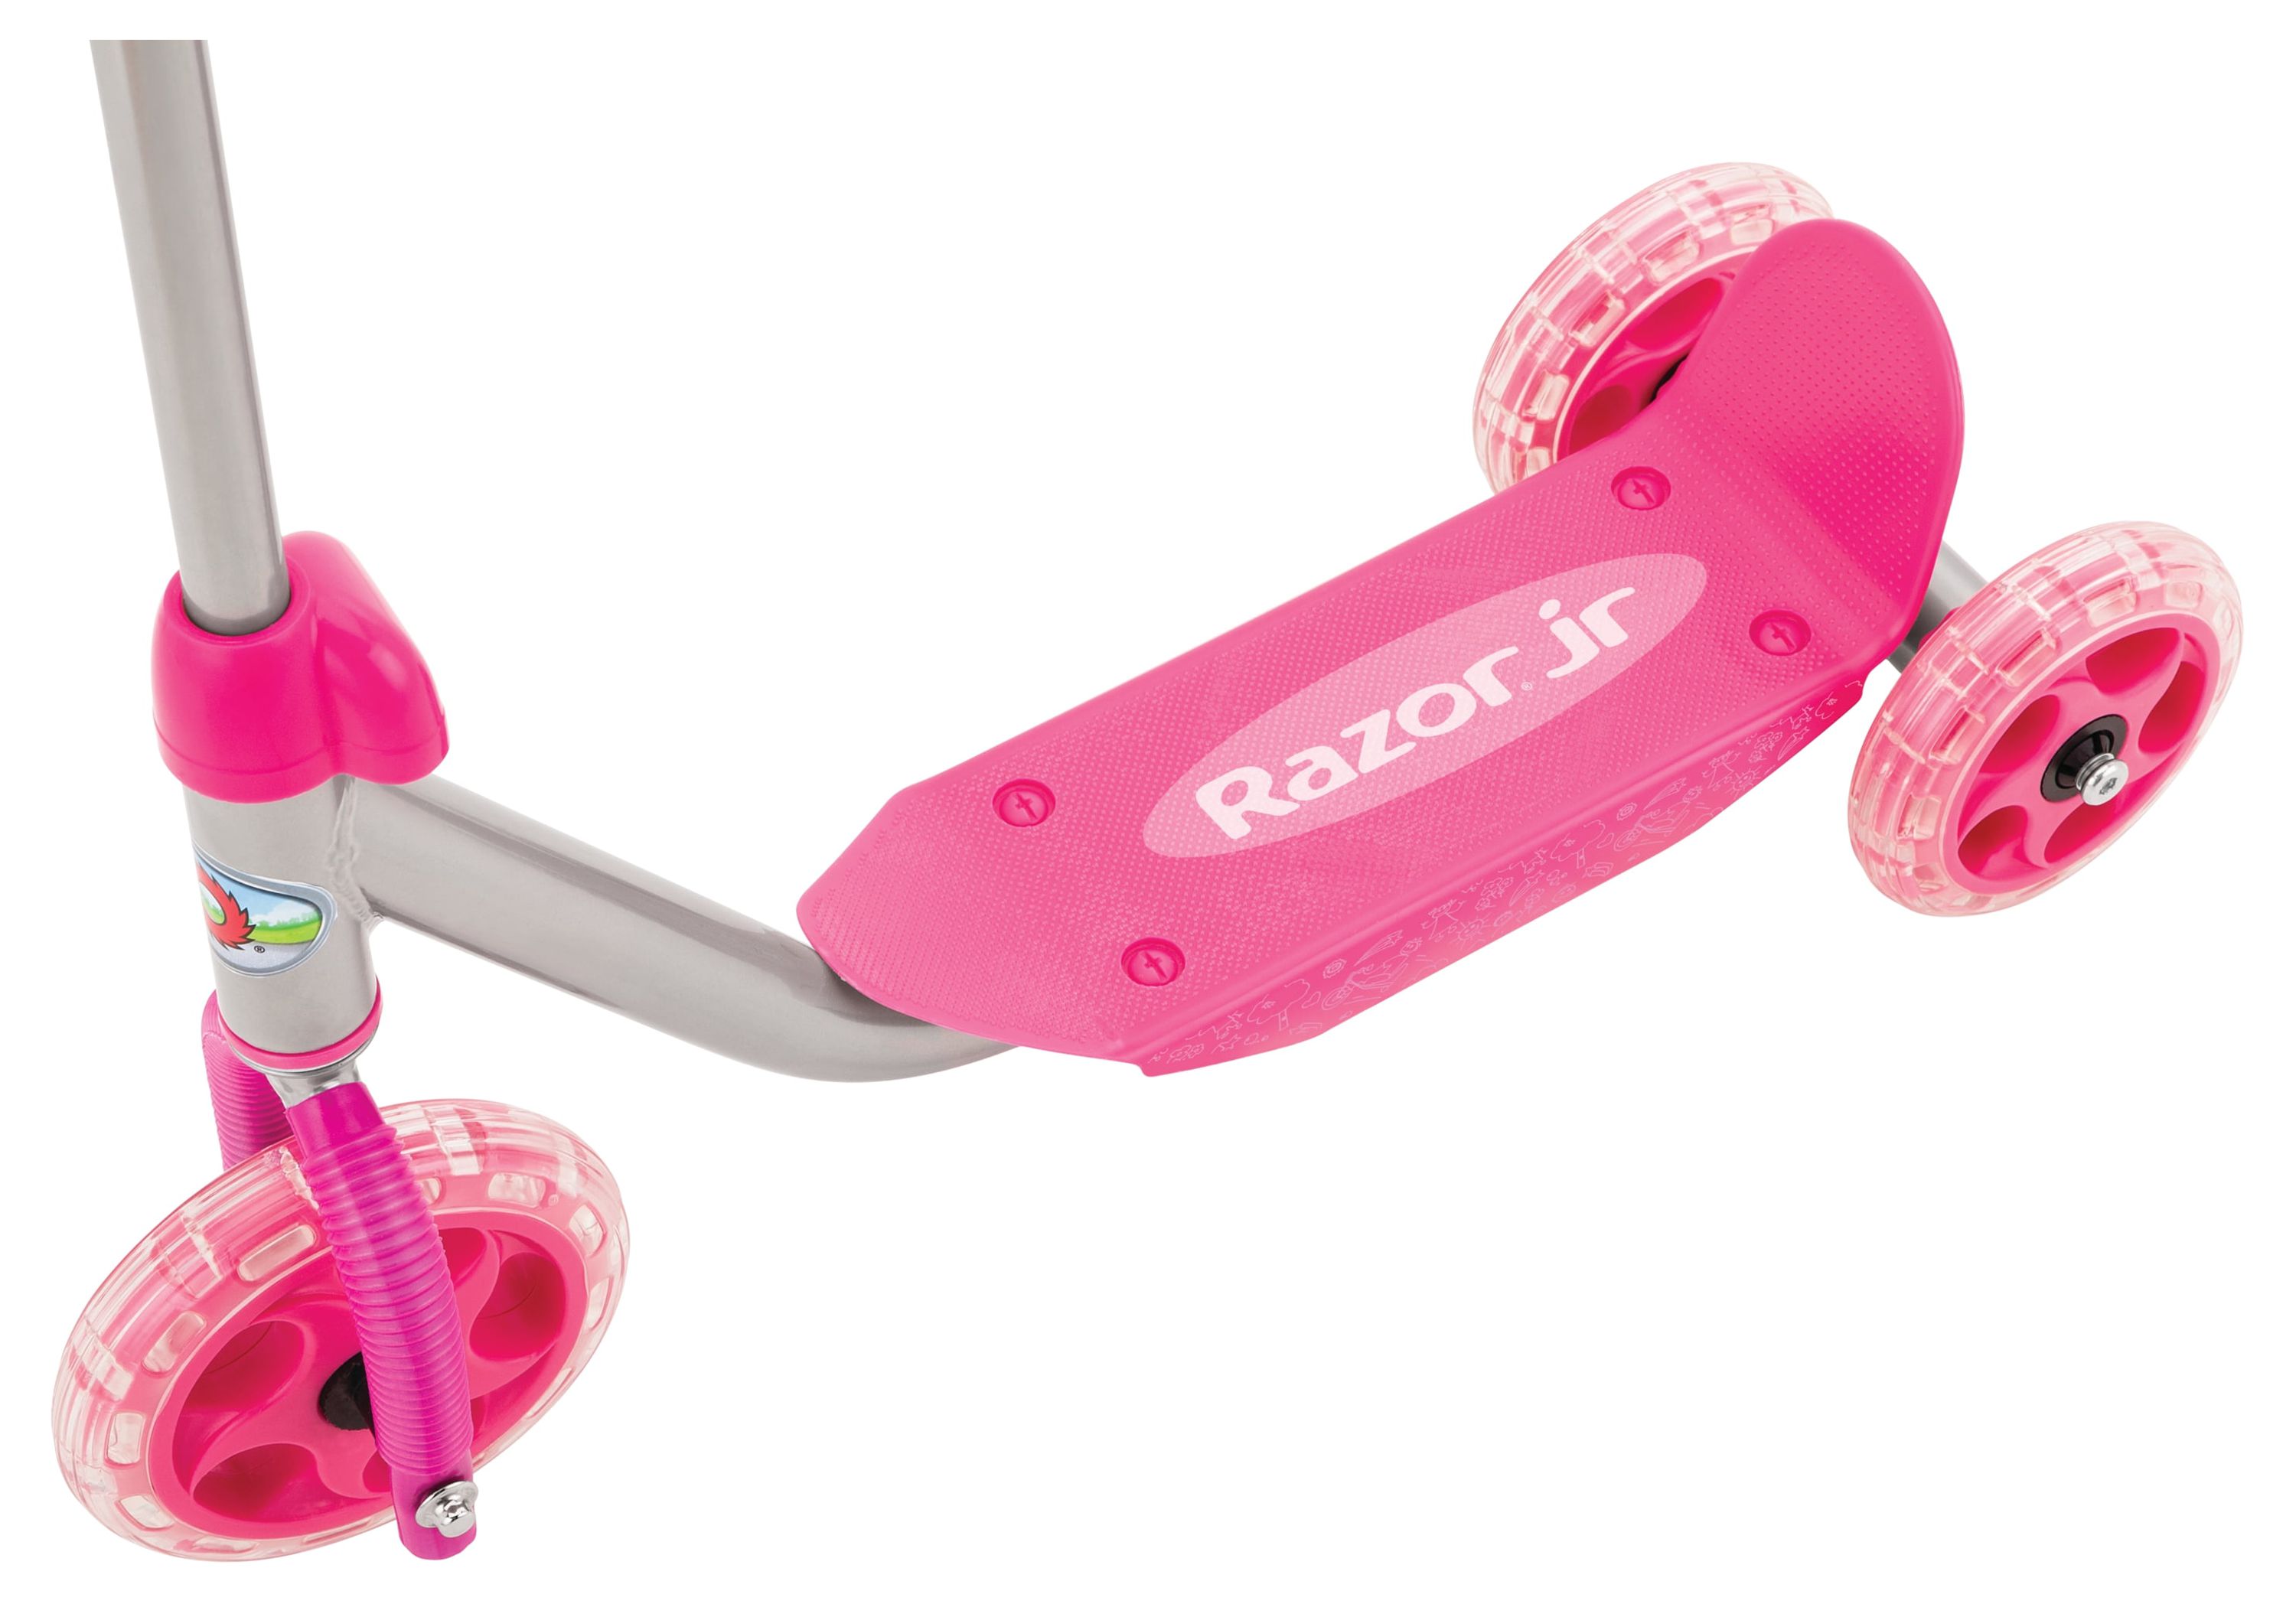 Razor Jr 3-Wheel Lil' Kick Scooter - For Ages 3 and up, Pink - image 5 of 8